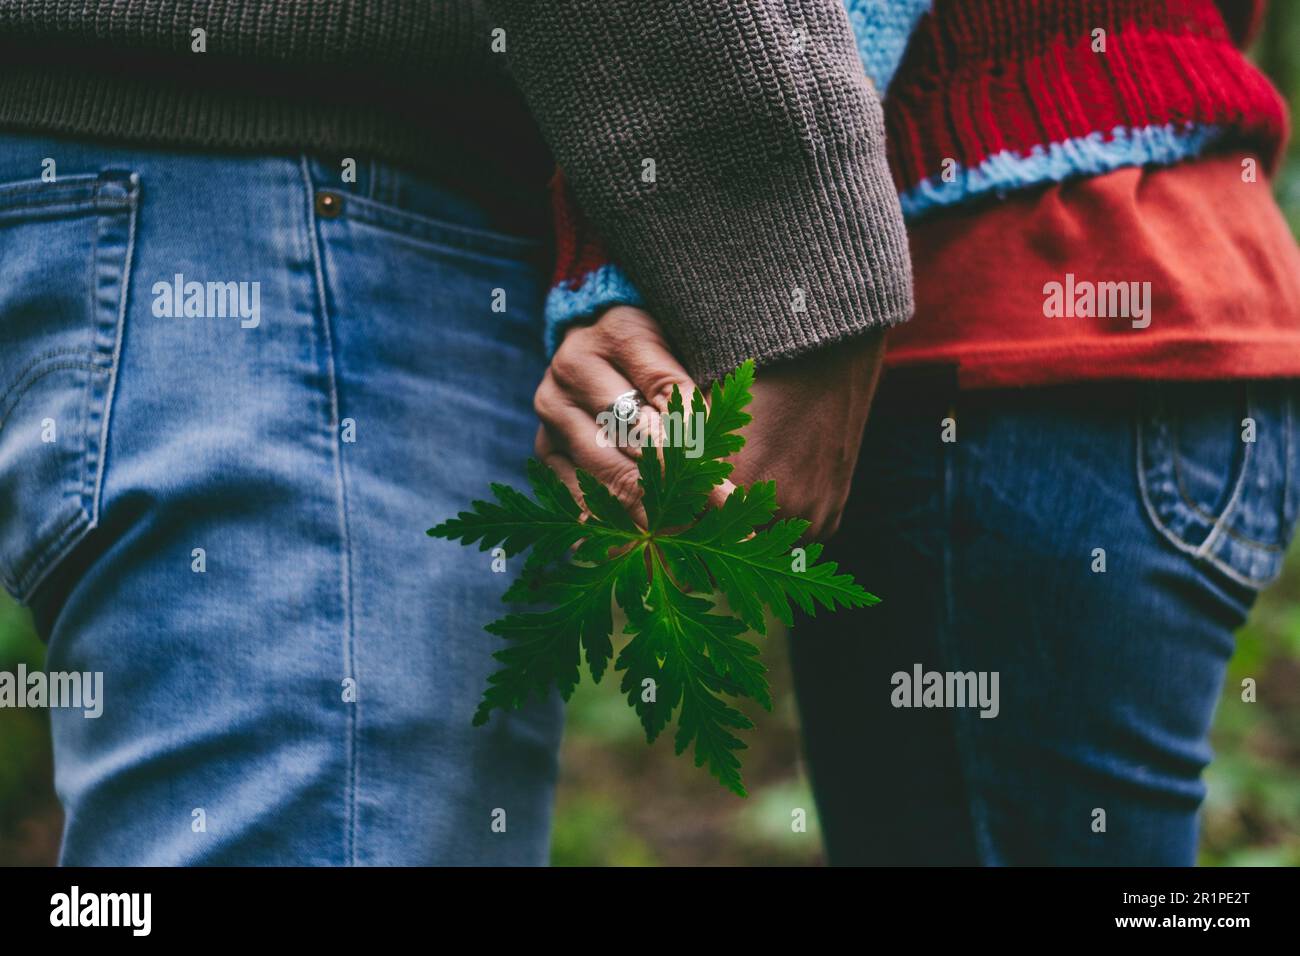 Couple, detail, hands holding, leaf, forest, outside, togetherness Stock Photo